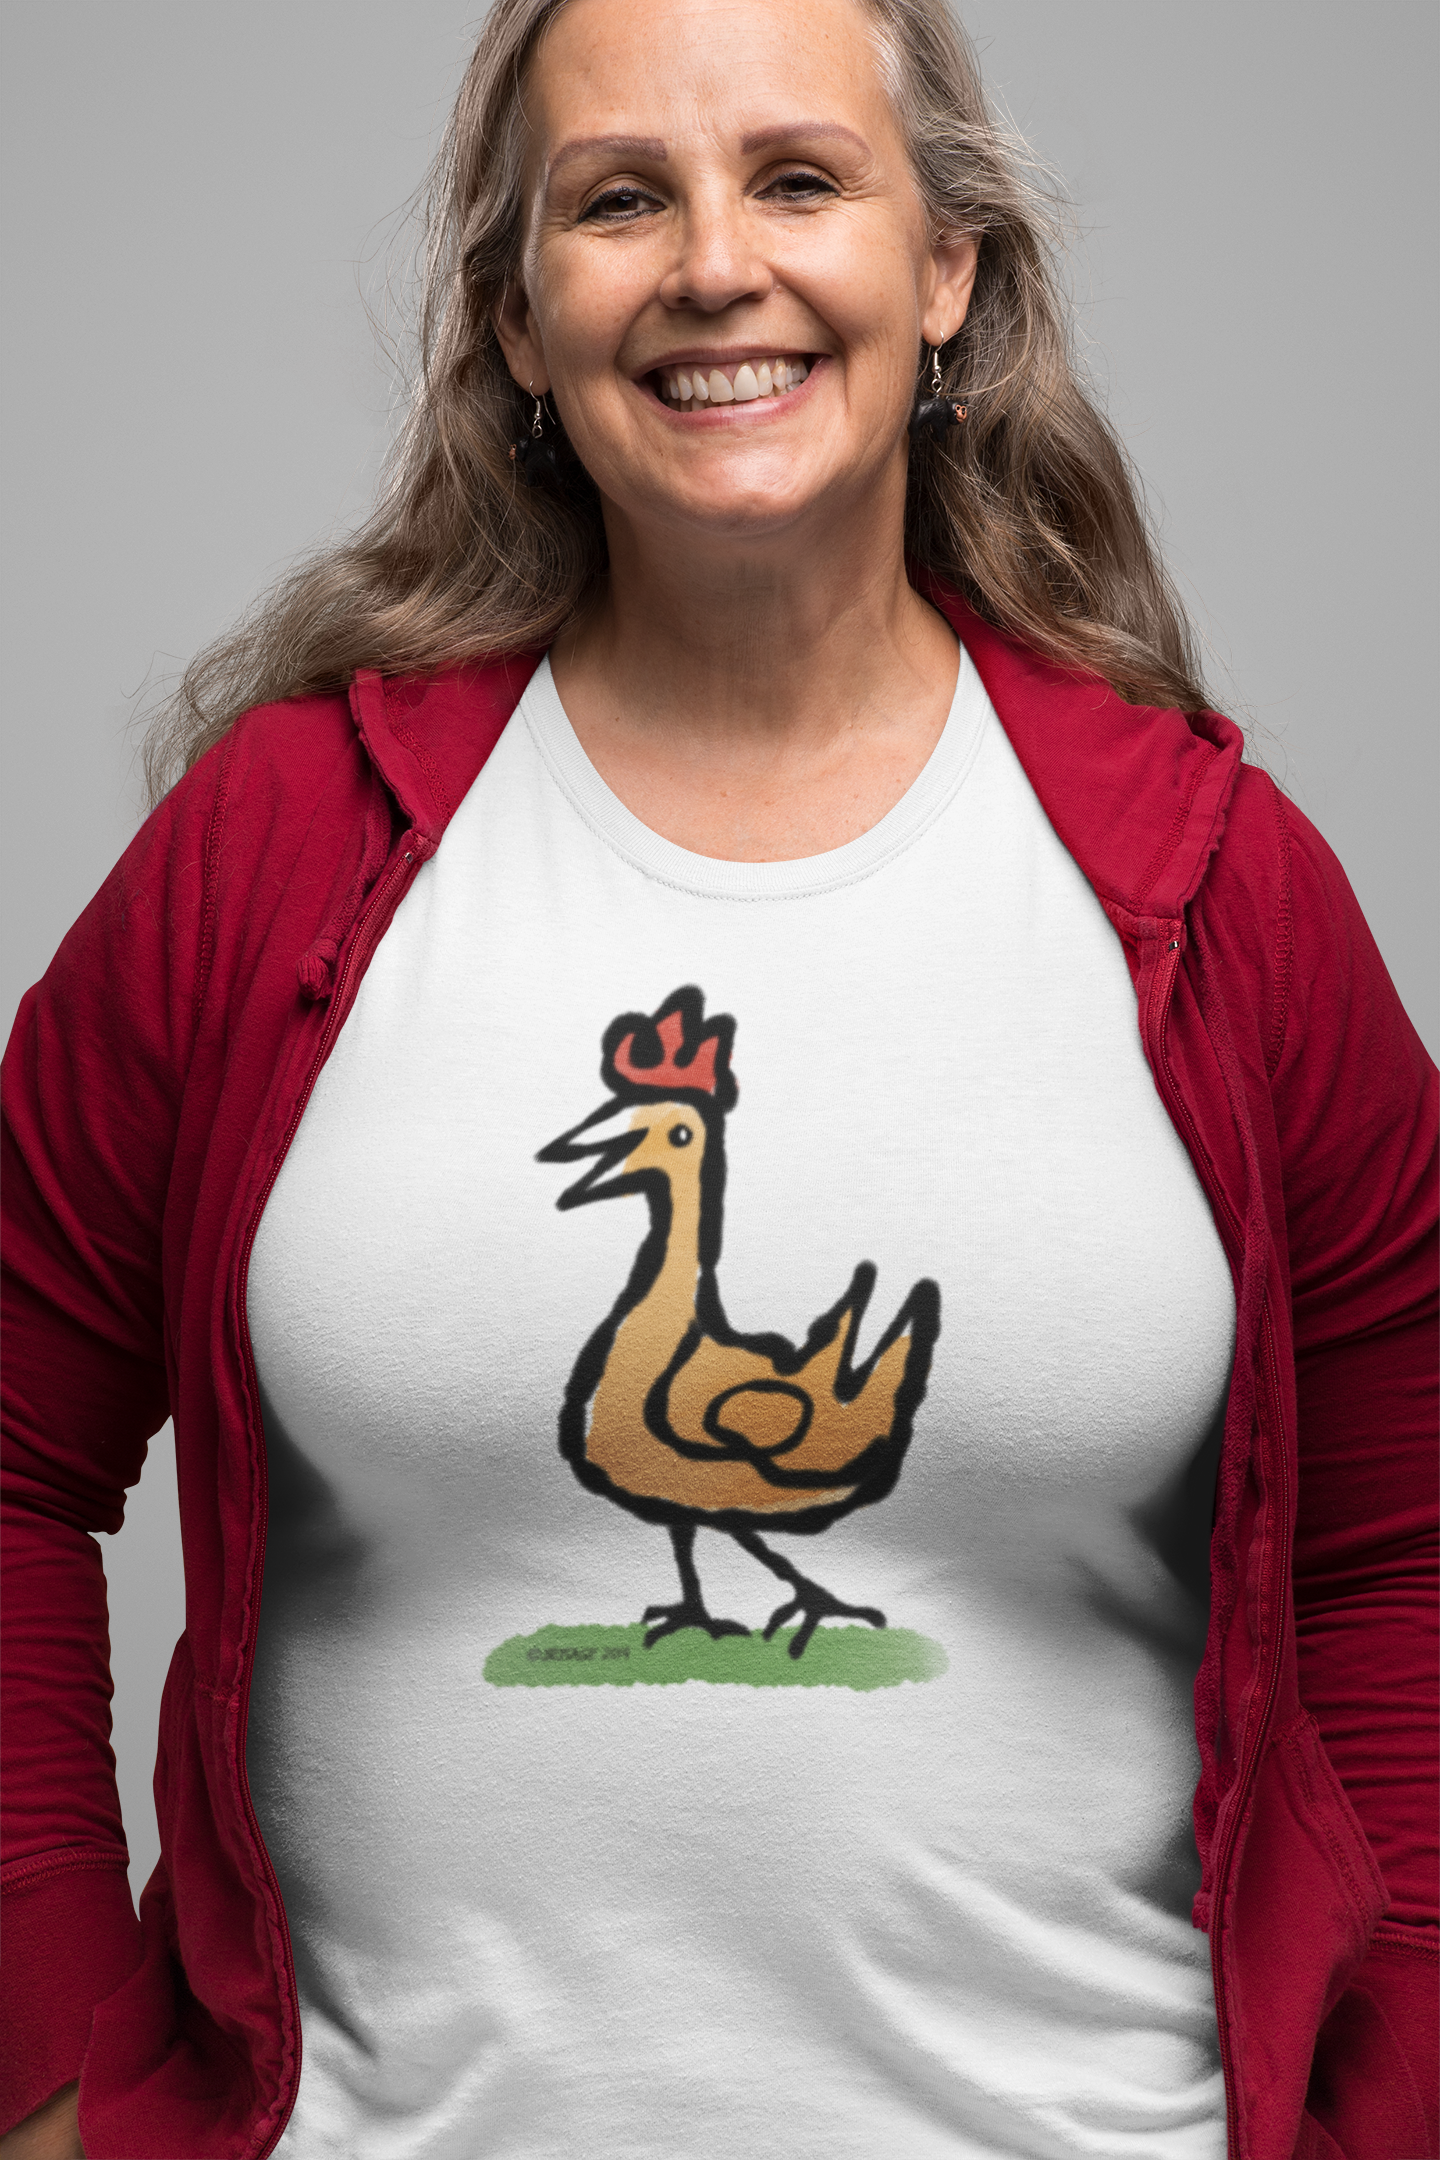 Happy Chicken T-shirt - Woman wearing Illustrated Funny Chicken design on a white vegan cotton t-shirt by Hector and Bone